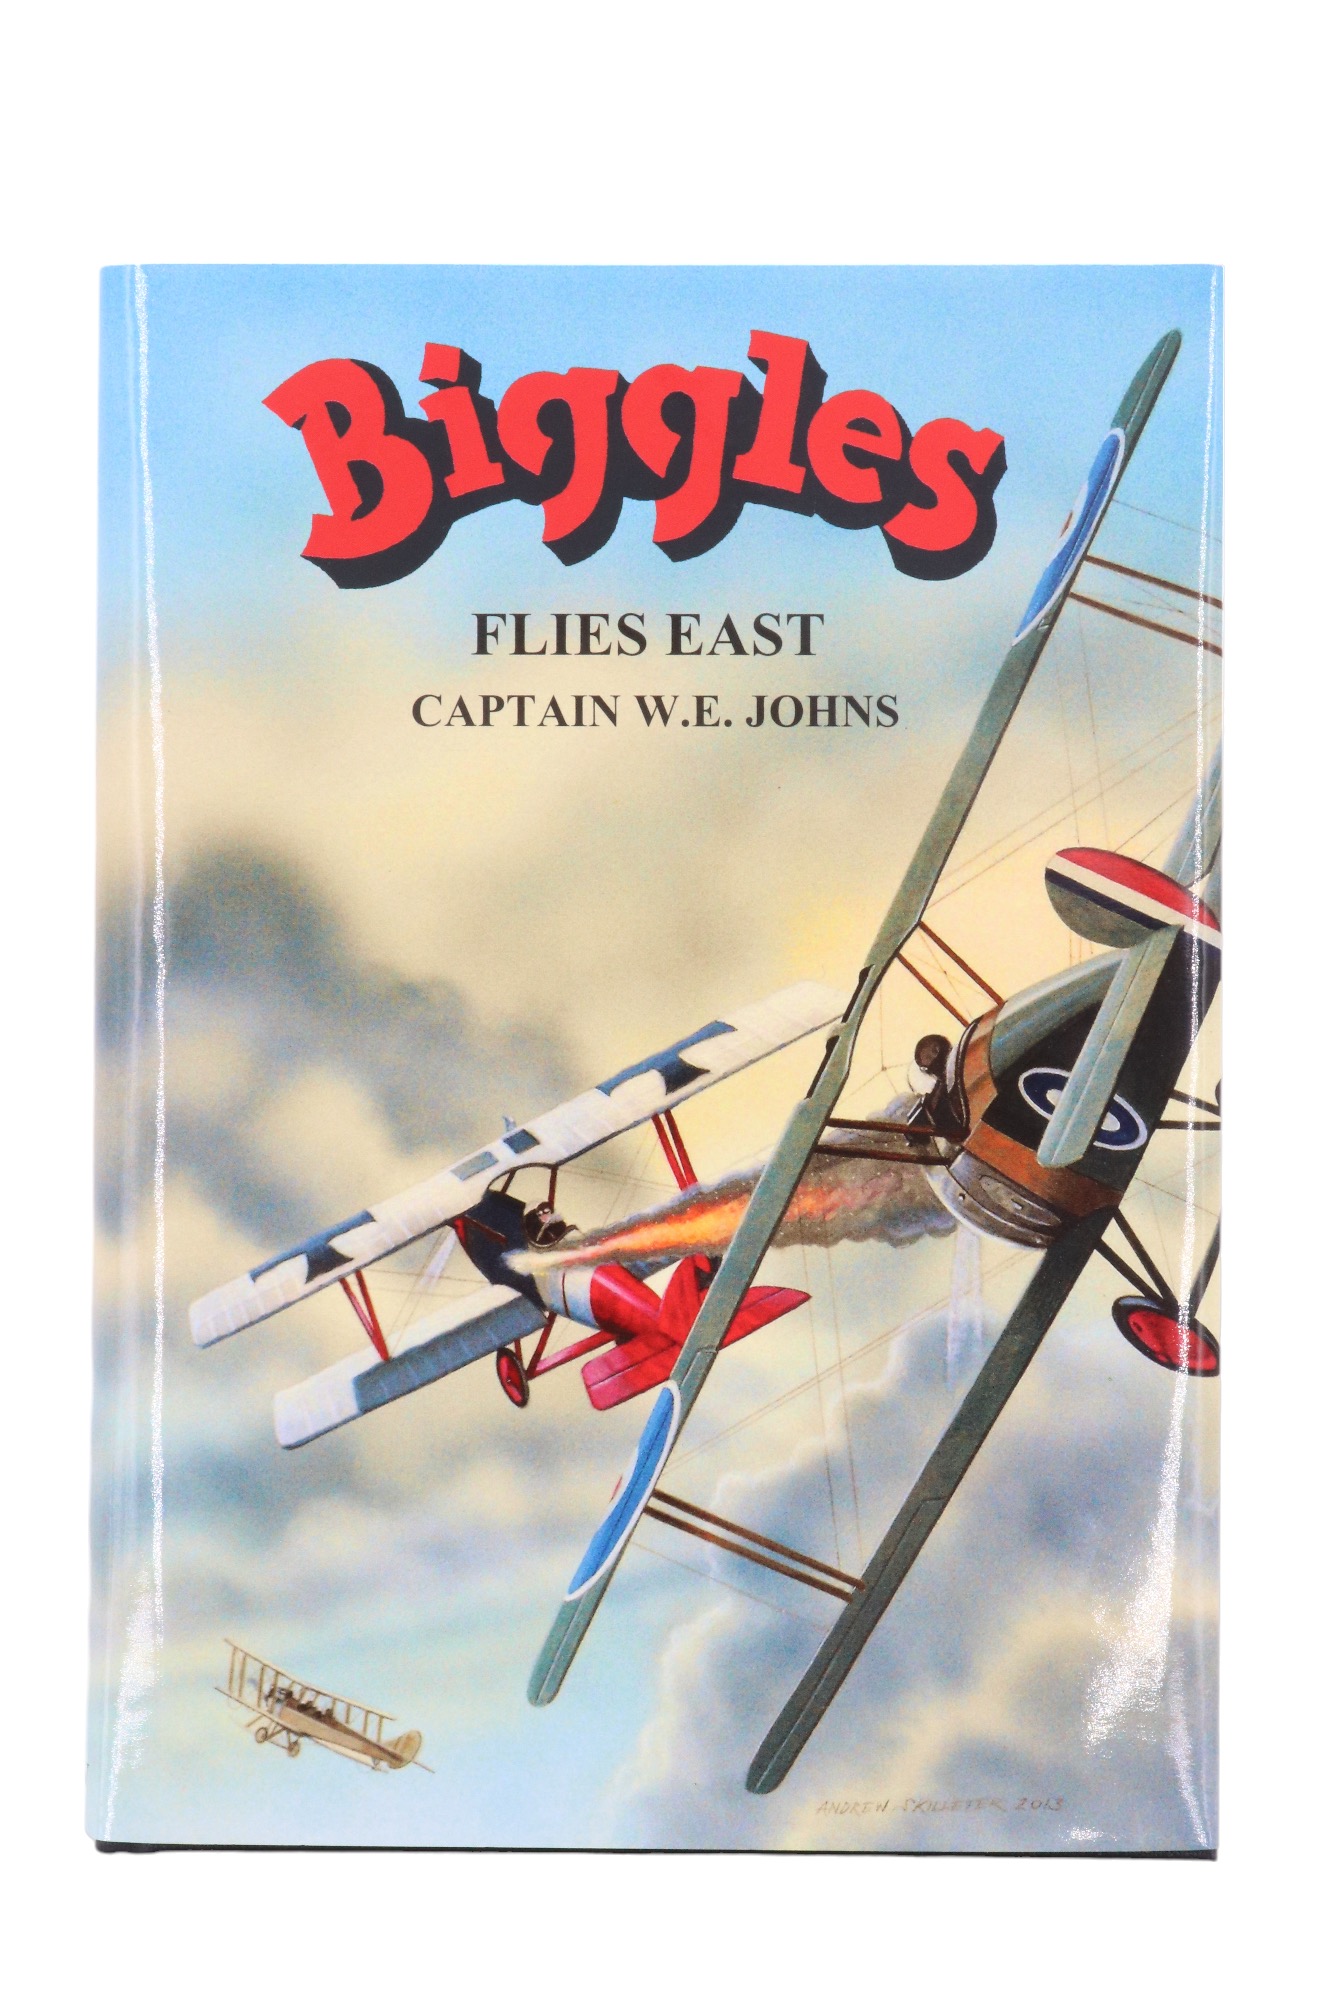 Captain W E Johns, "Biggles Flies East", one of a limited edition of 300 copies, signed by publisher - Image 2 of 4